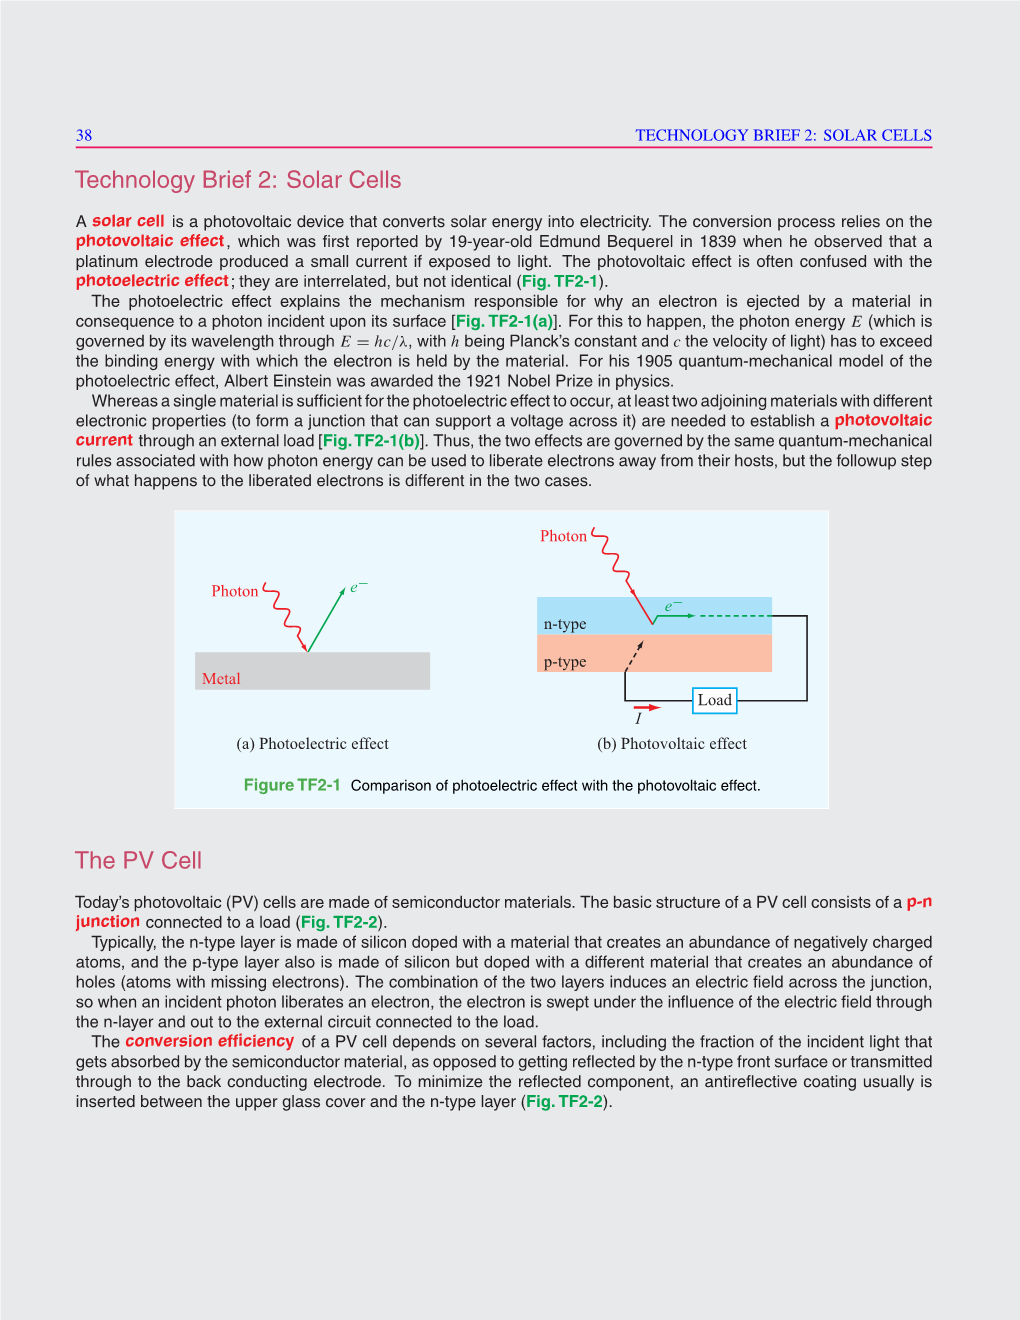 Technology Brief 2: Solar Cells the PV Cell